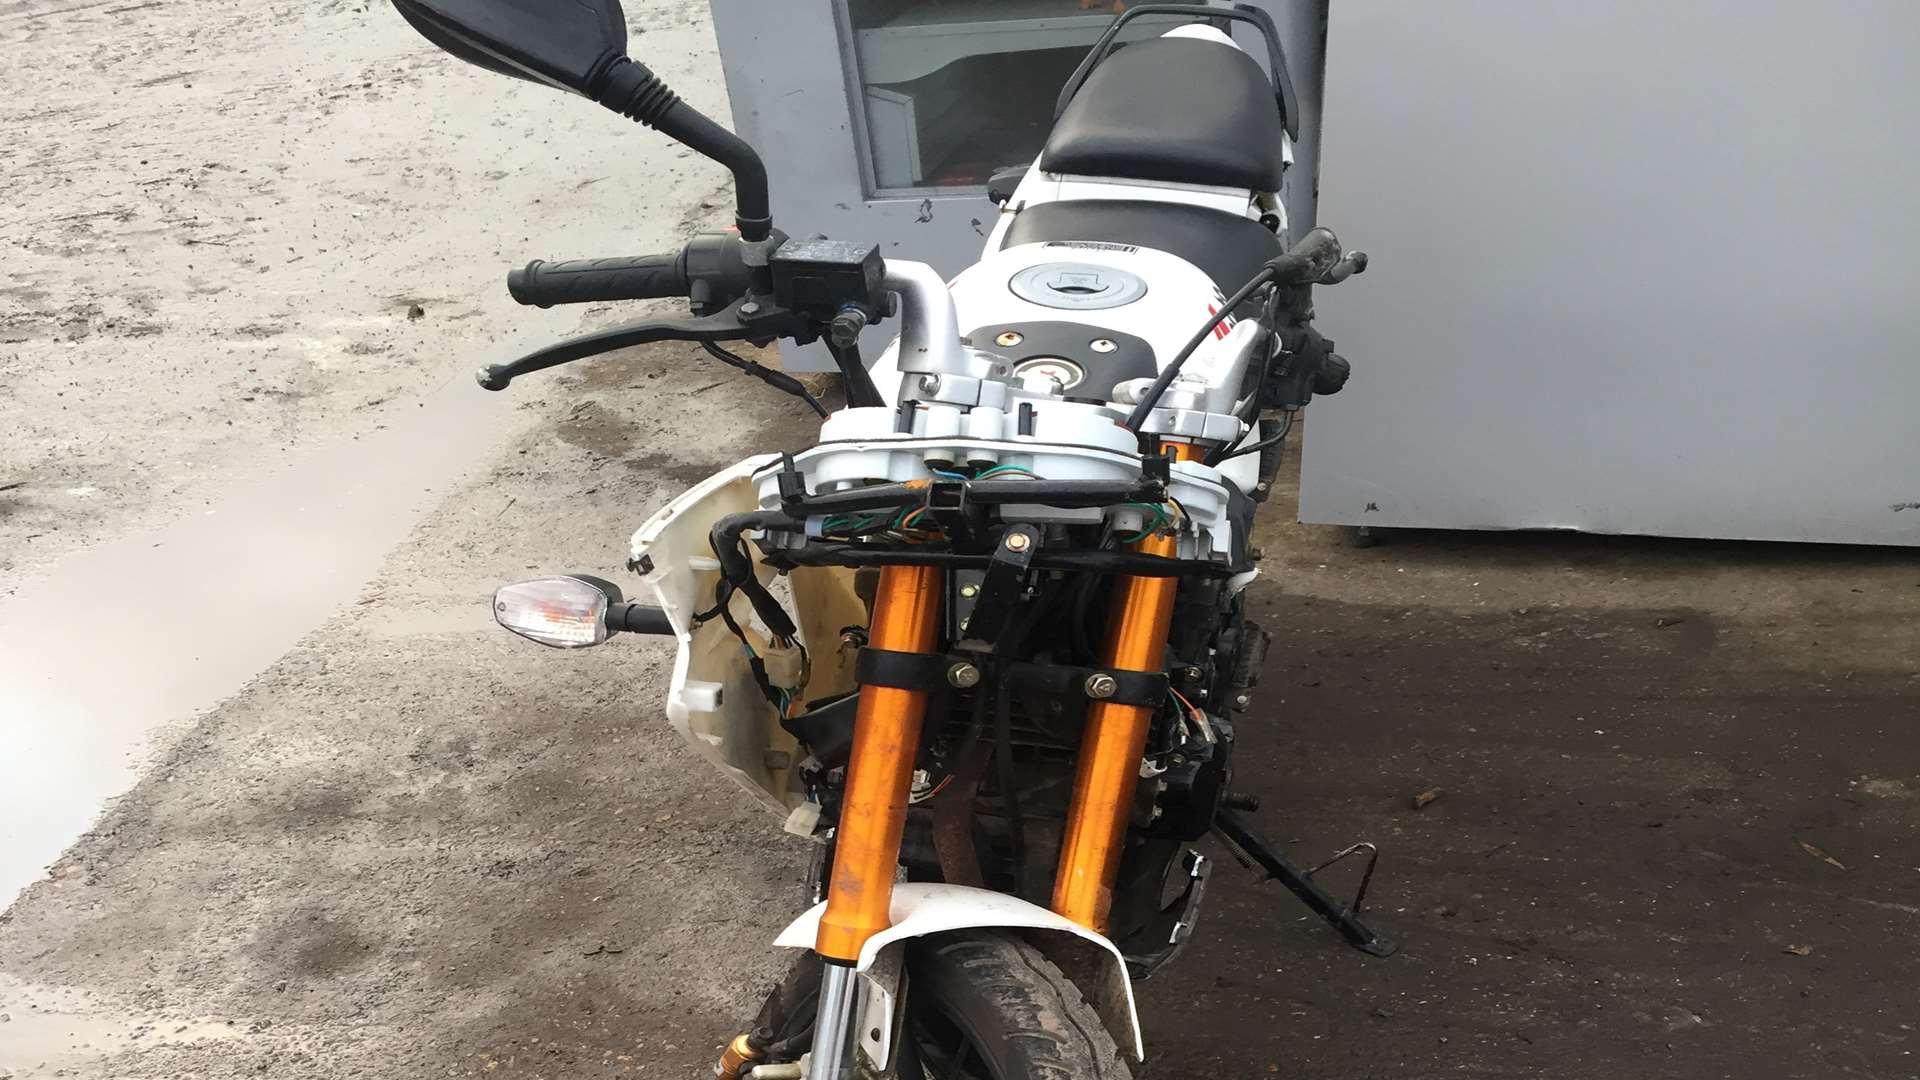 The damaged motorbike, which was hit by a car in Queenborough